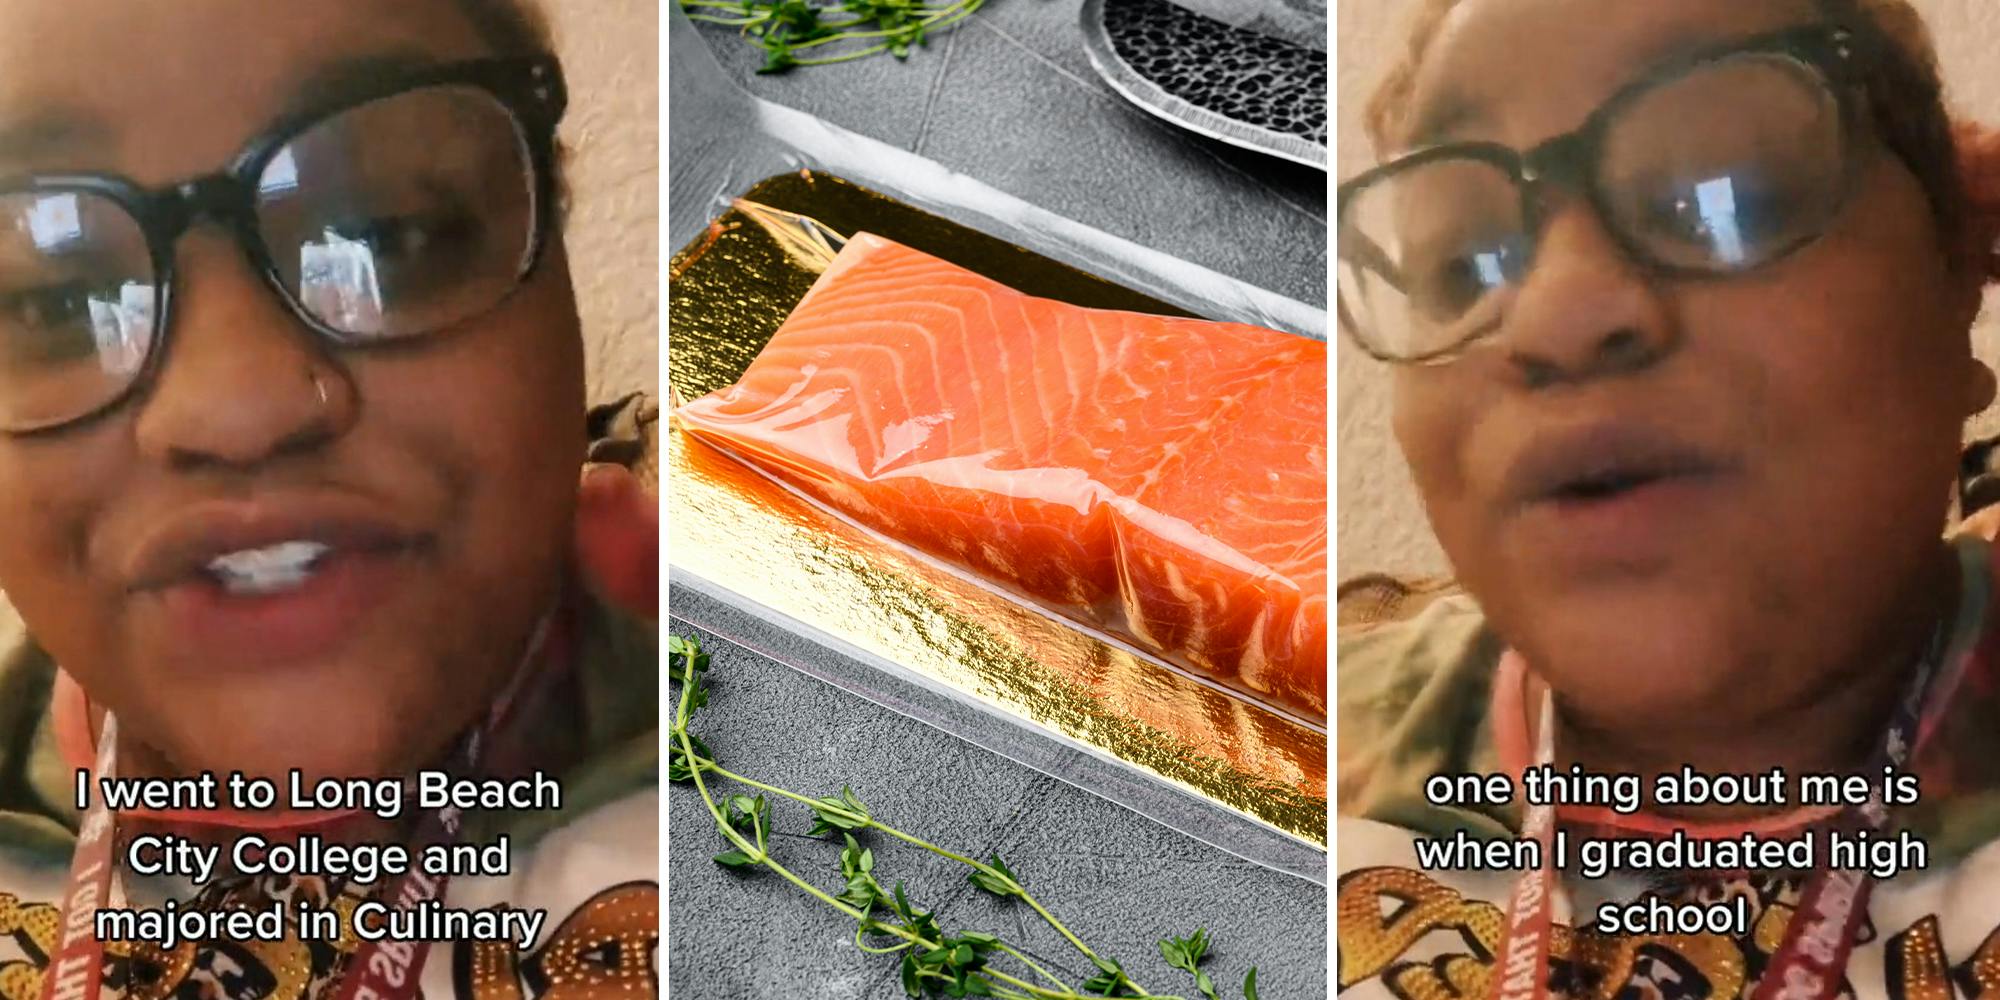 Customer buys salmon at Grocery Outlet. She’s shocked when she opens the package